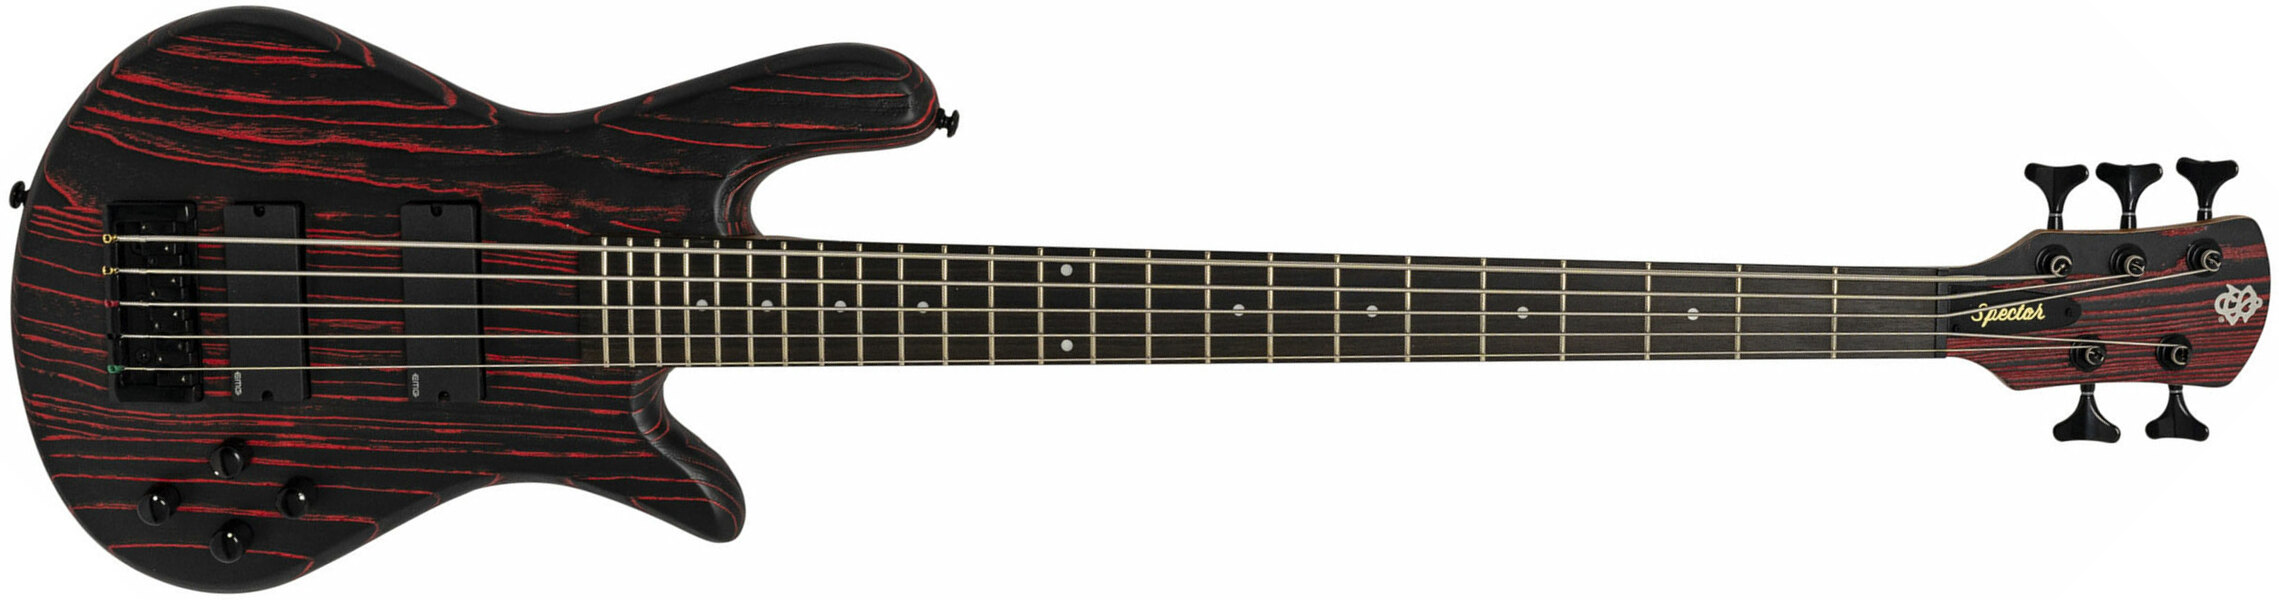 Spector Ns Pulse I 5c Active Emg Eb - Cinder Red - Solidbody E-bass - Main picture